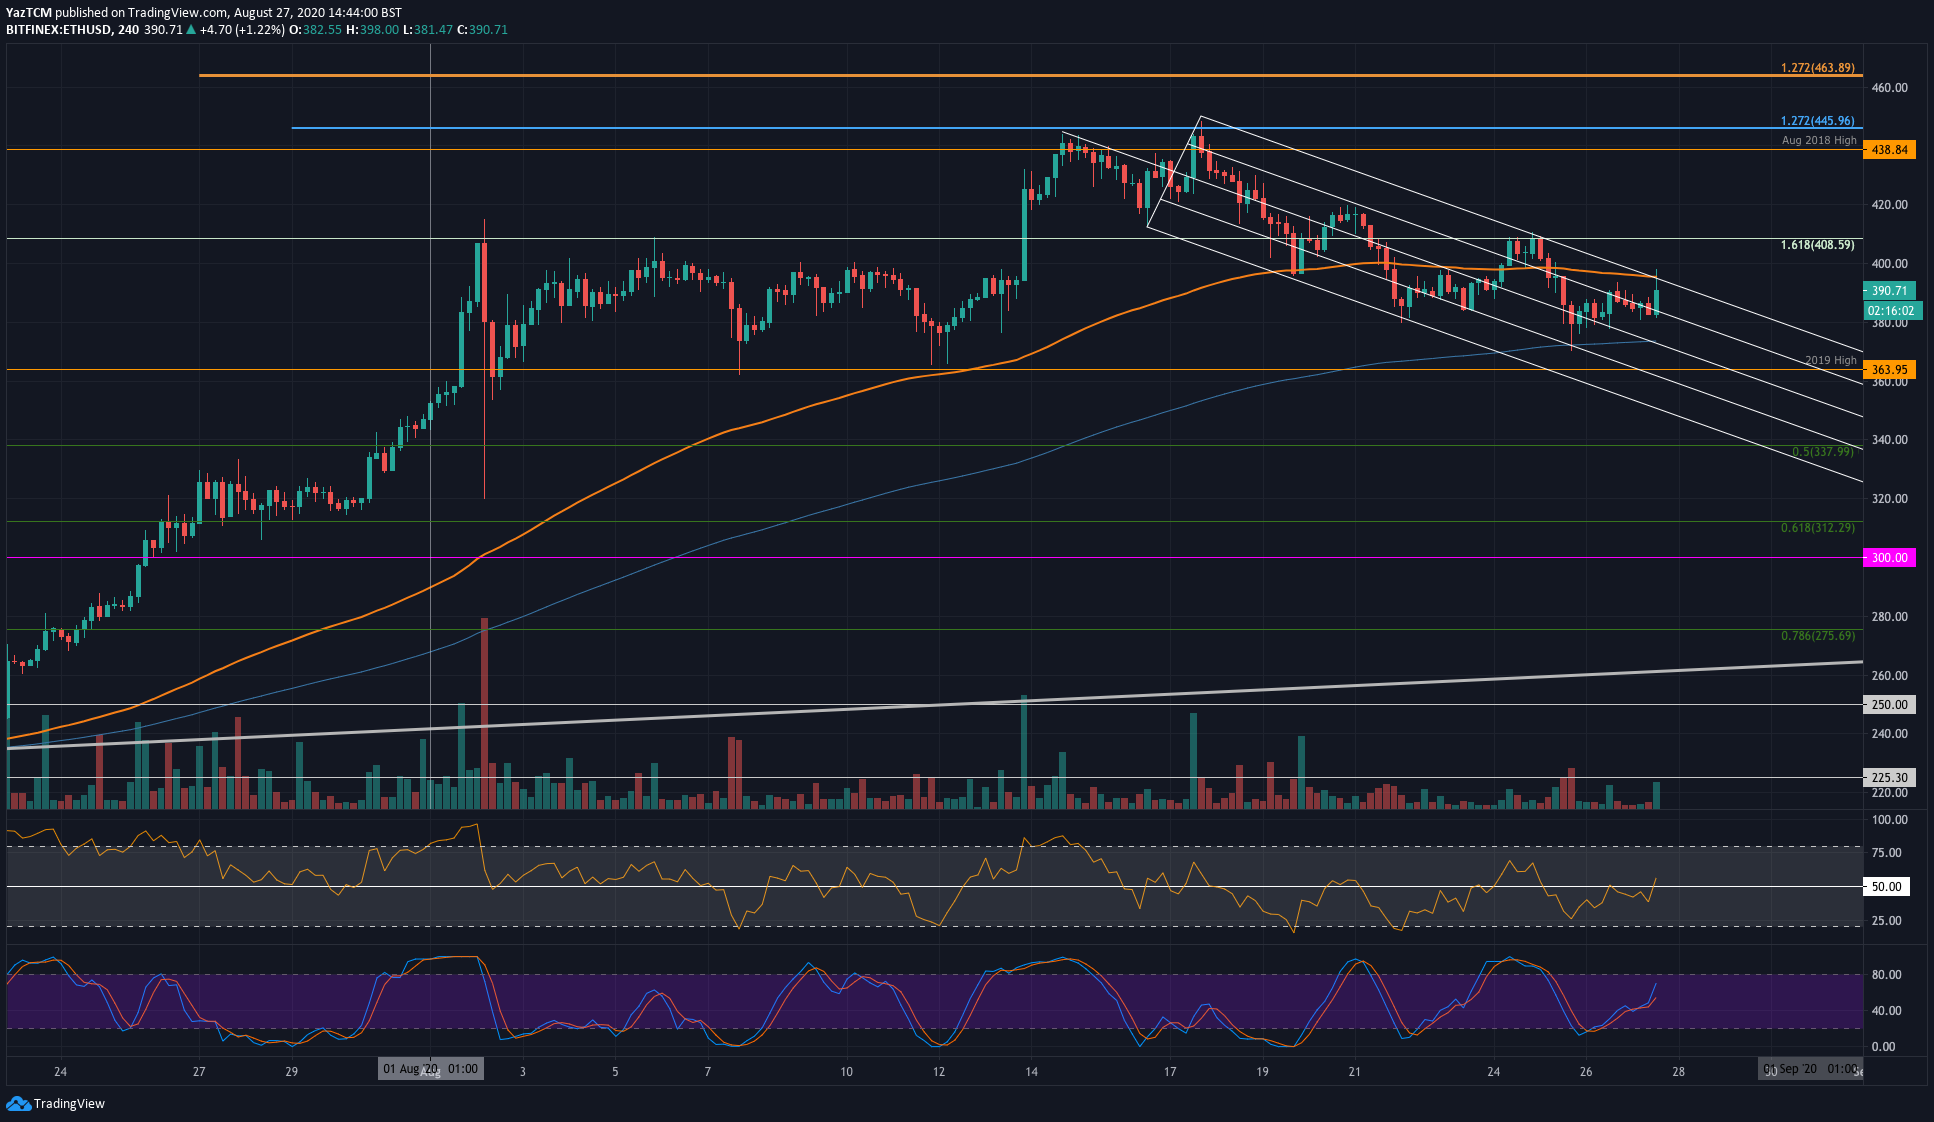 Ethereum Price Analysis: ETH Fights For $380 Before Further Downside Action